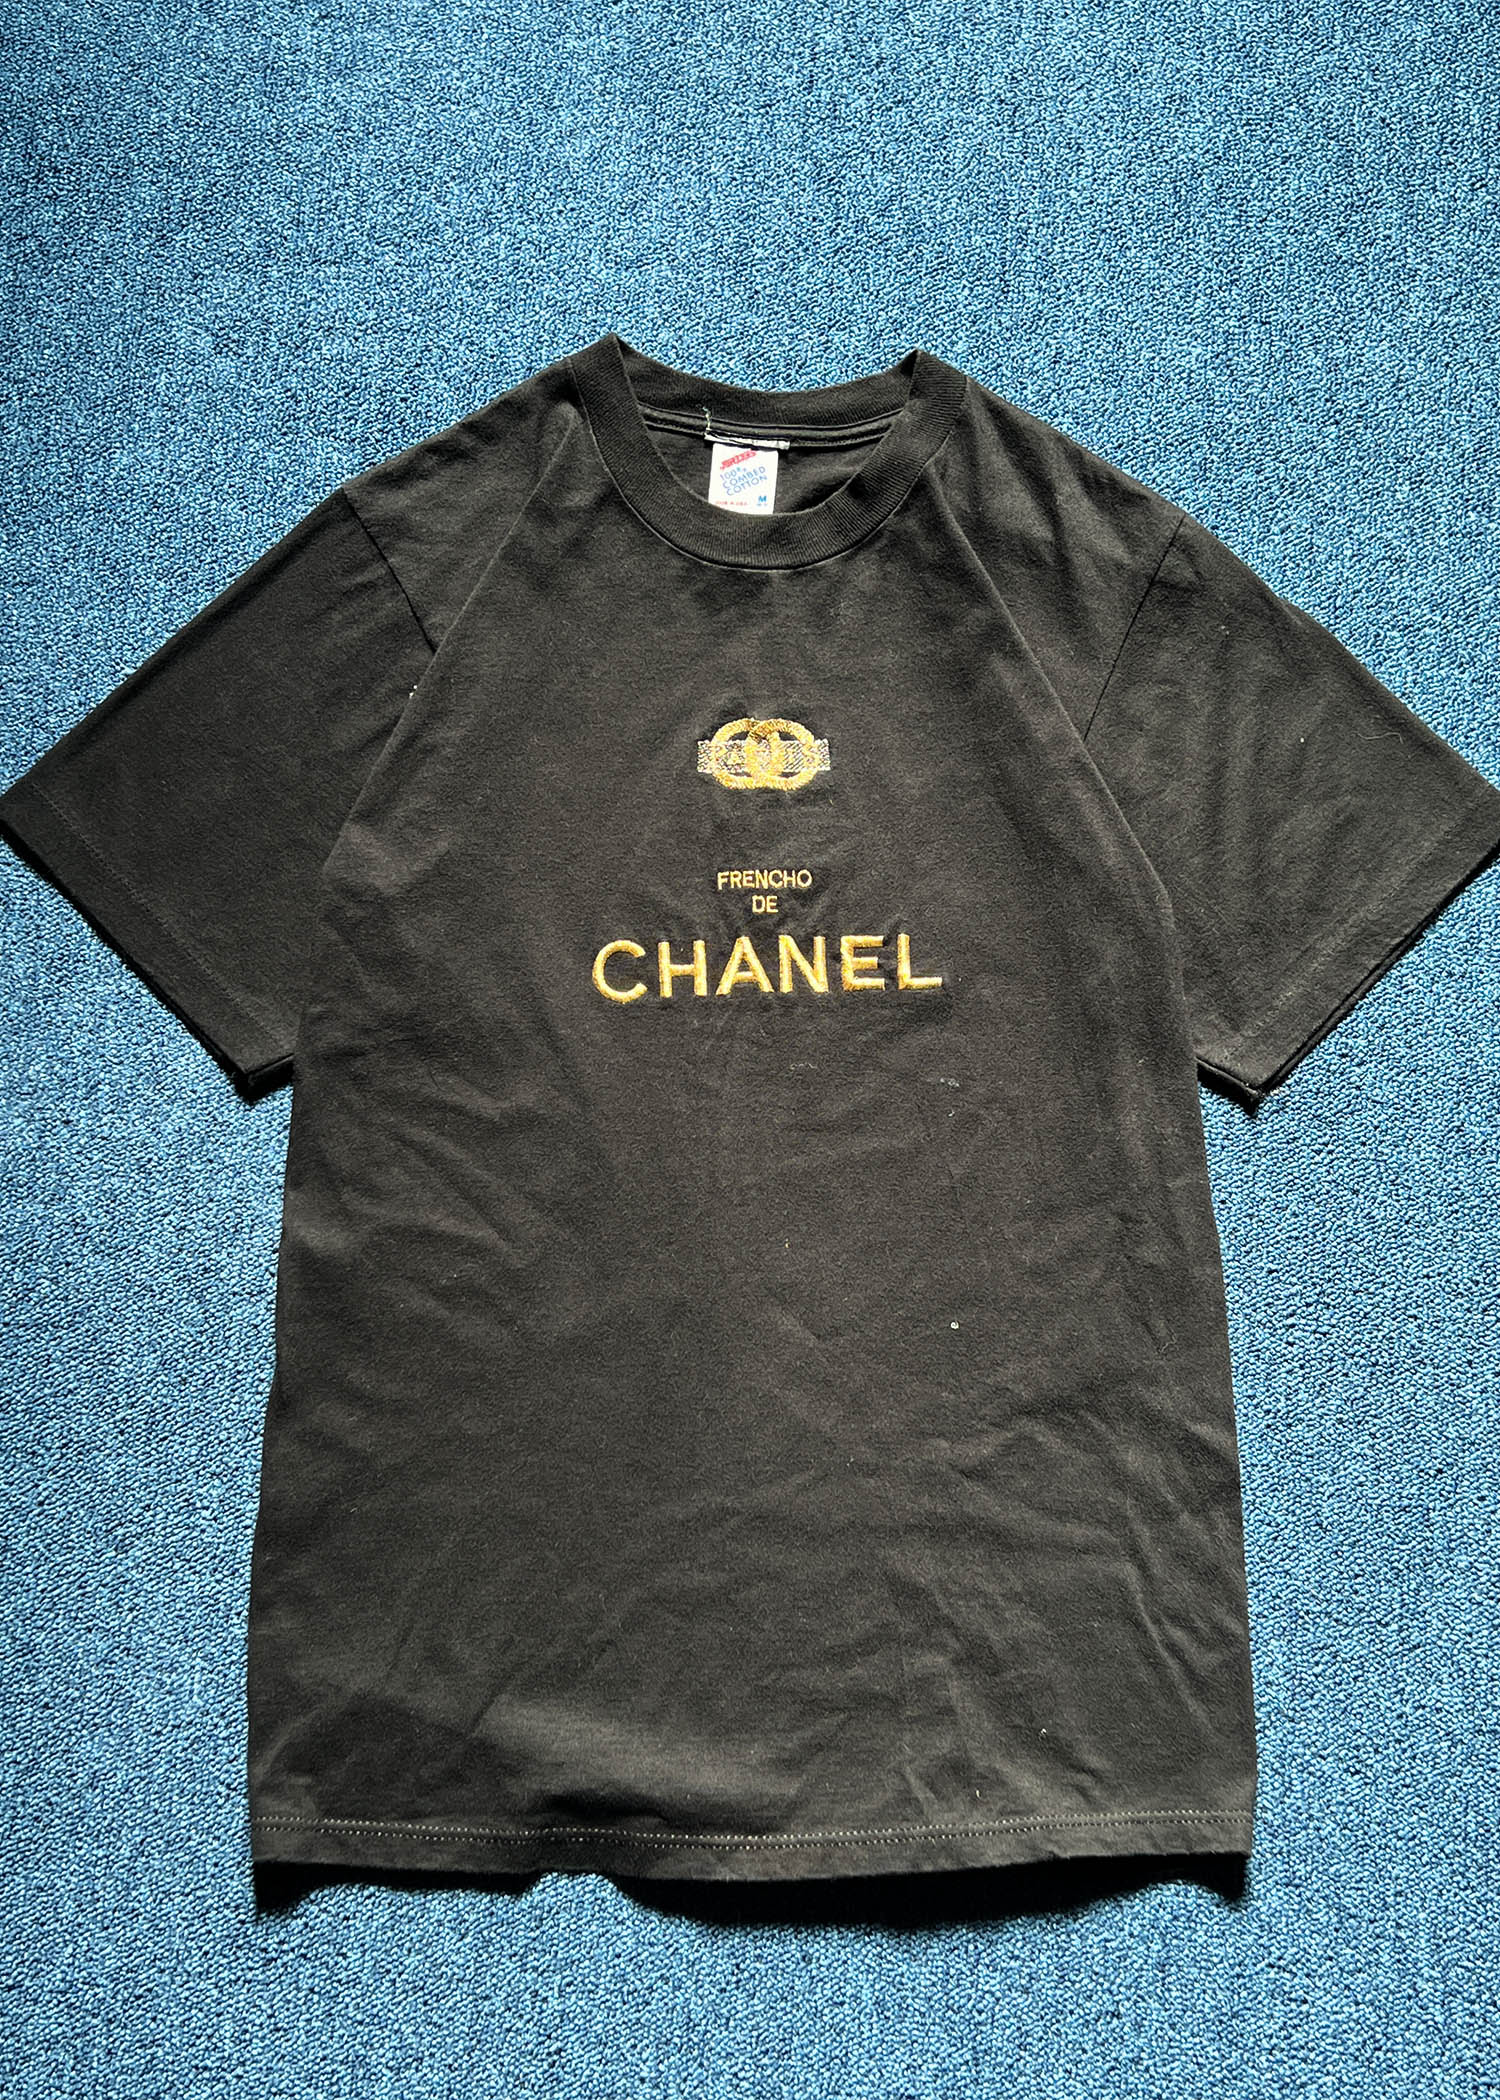 CHANEL bootleg t-shirts by JERZEES